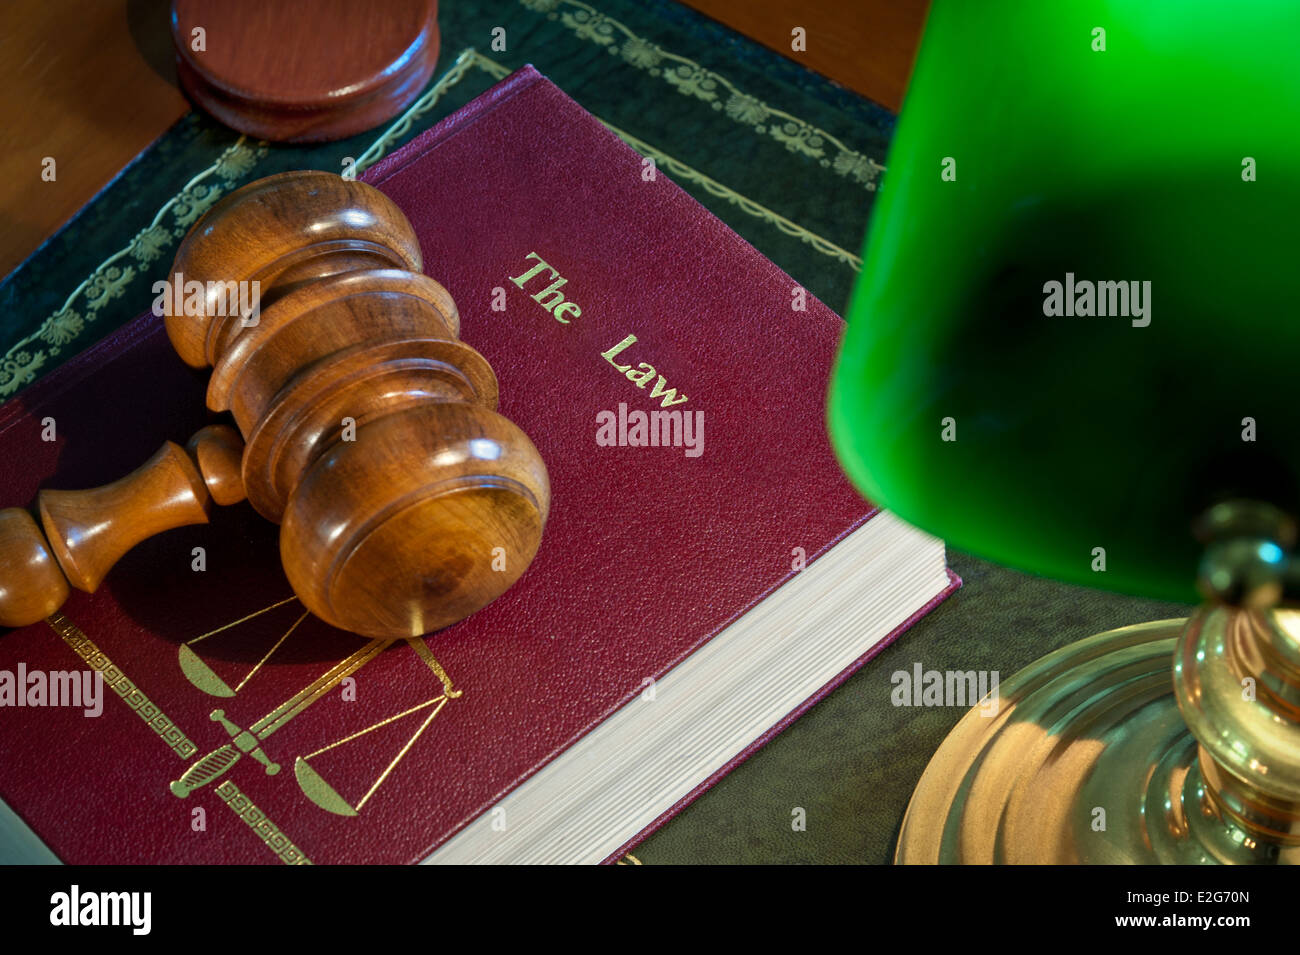 LAW COURT JUDGE SENTENCING DELIBERATION CHAMBERS CONCEPT Judges gavel on Law book with scales of justice emblem lit by desk lamp on leather bound desk Stock Photo